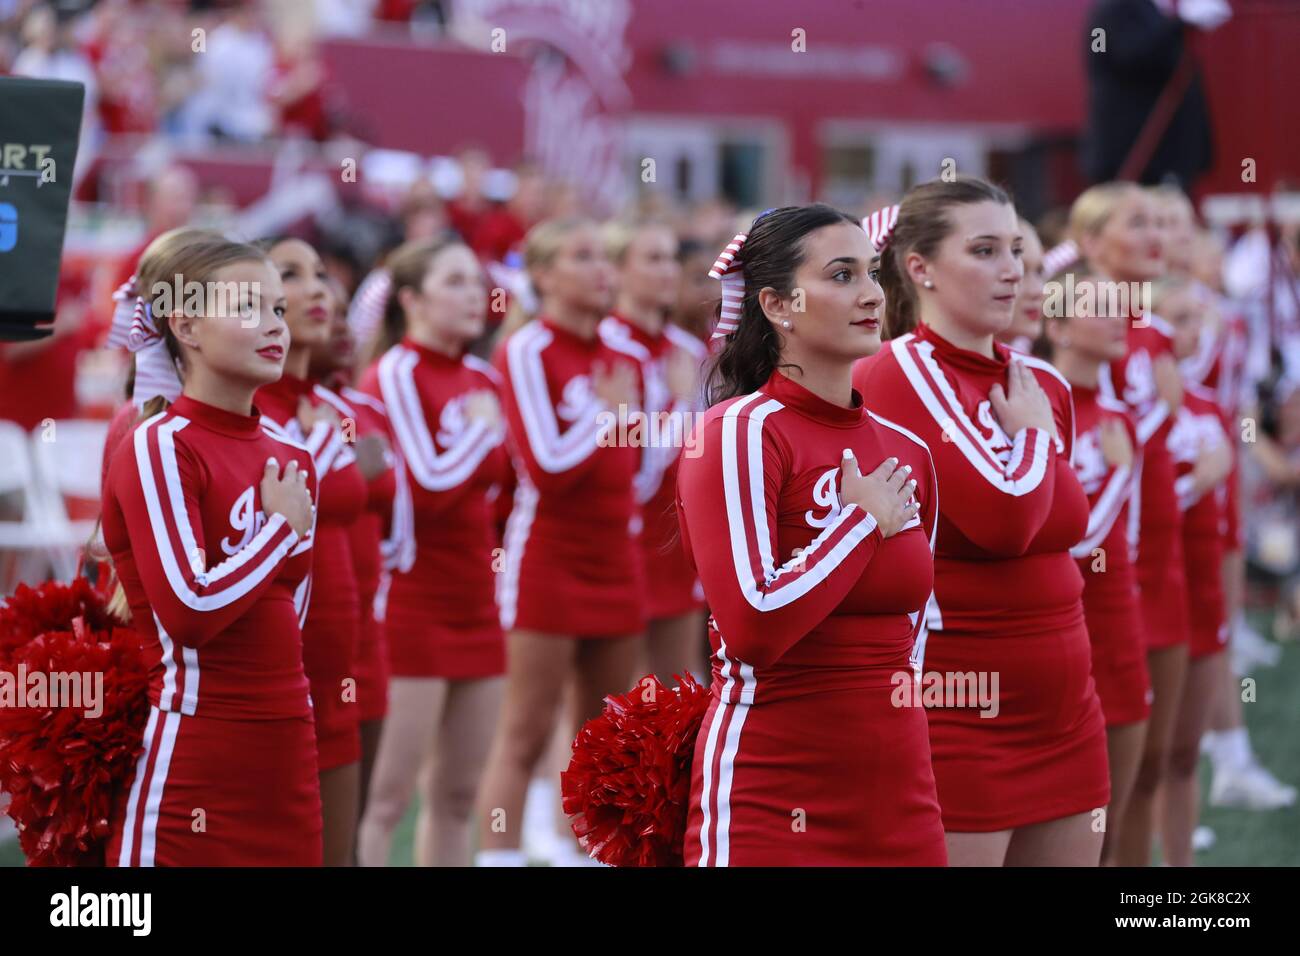 BLOOMINGTON, UNITED STATES - 2021/09/11: Indiana University cheerleaders place their hands over their hearts during the playing of the national anthem on the anniversary of the 9/11 attack before Indiana University's plays against Idaho during an NCAA football game on September 11, 2021 at Memorial Stadium in Bloomington, Ind. The Hoosiers beat the Vandals 56-14. Stock Photo